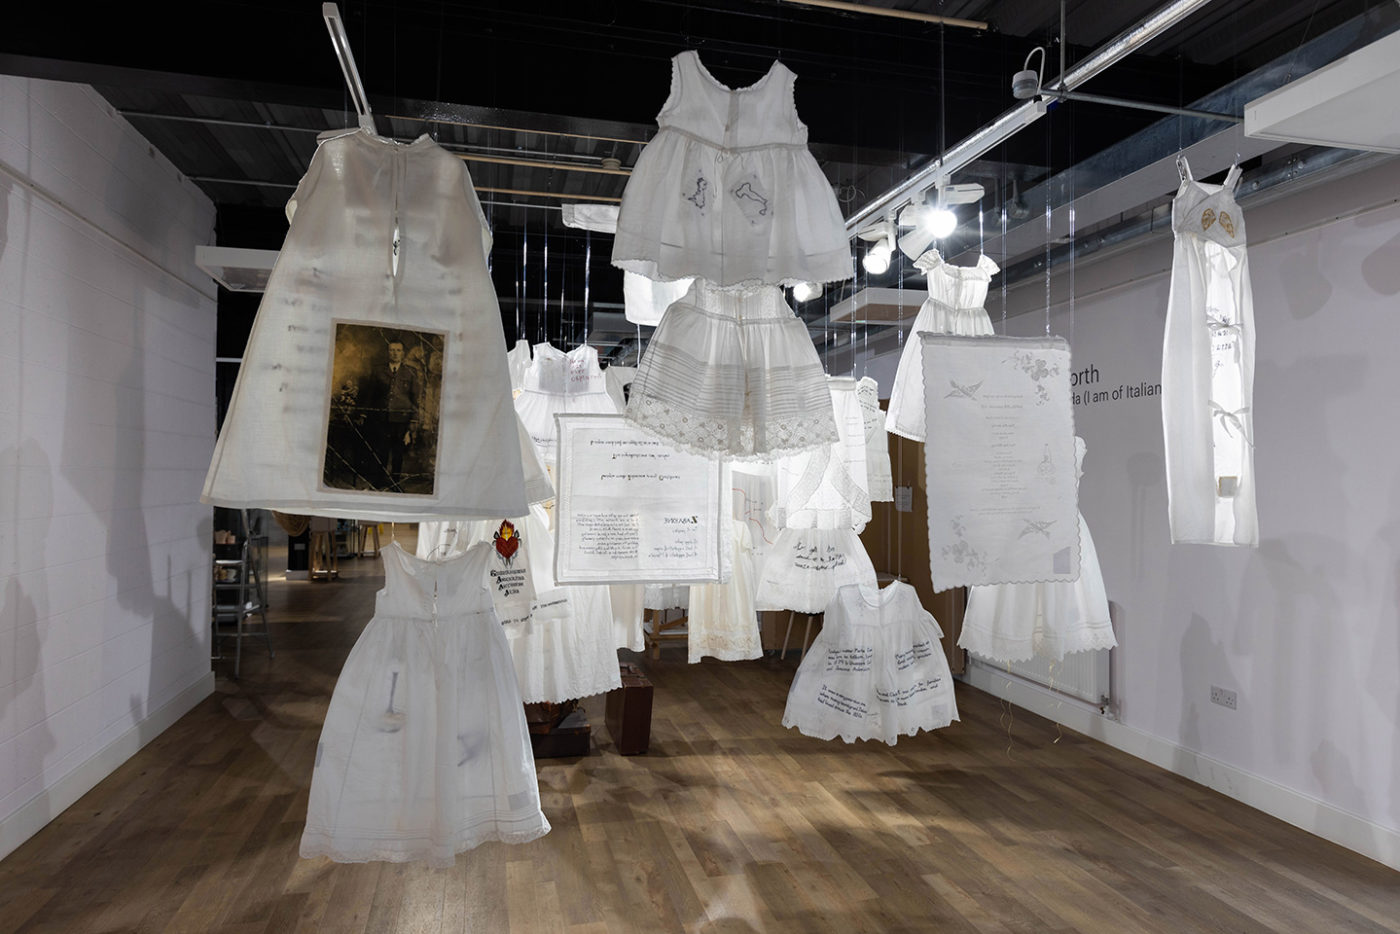 Installation shown from the back, EXILE: sono oriunda (I am of Italian descent) at The Hub, Sleaford, Susan Aldworth, 2023. Photograph by Scott Murray.